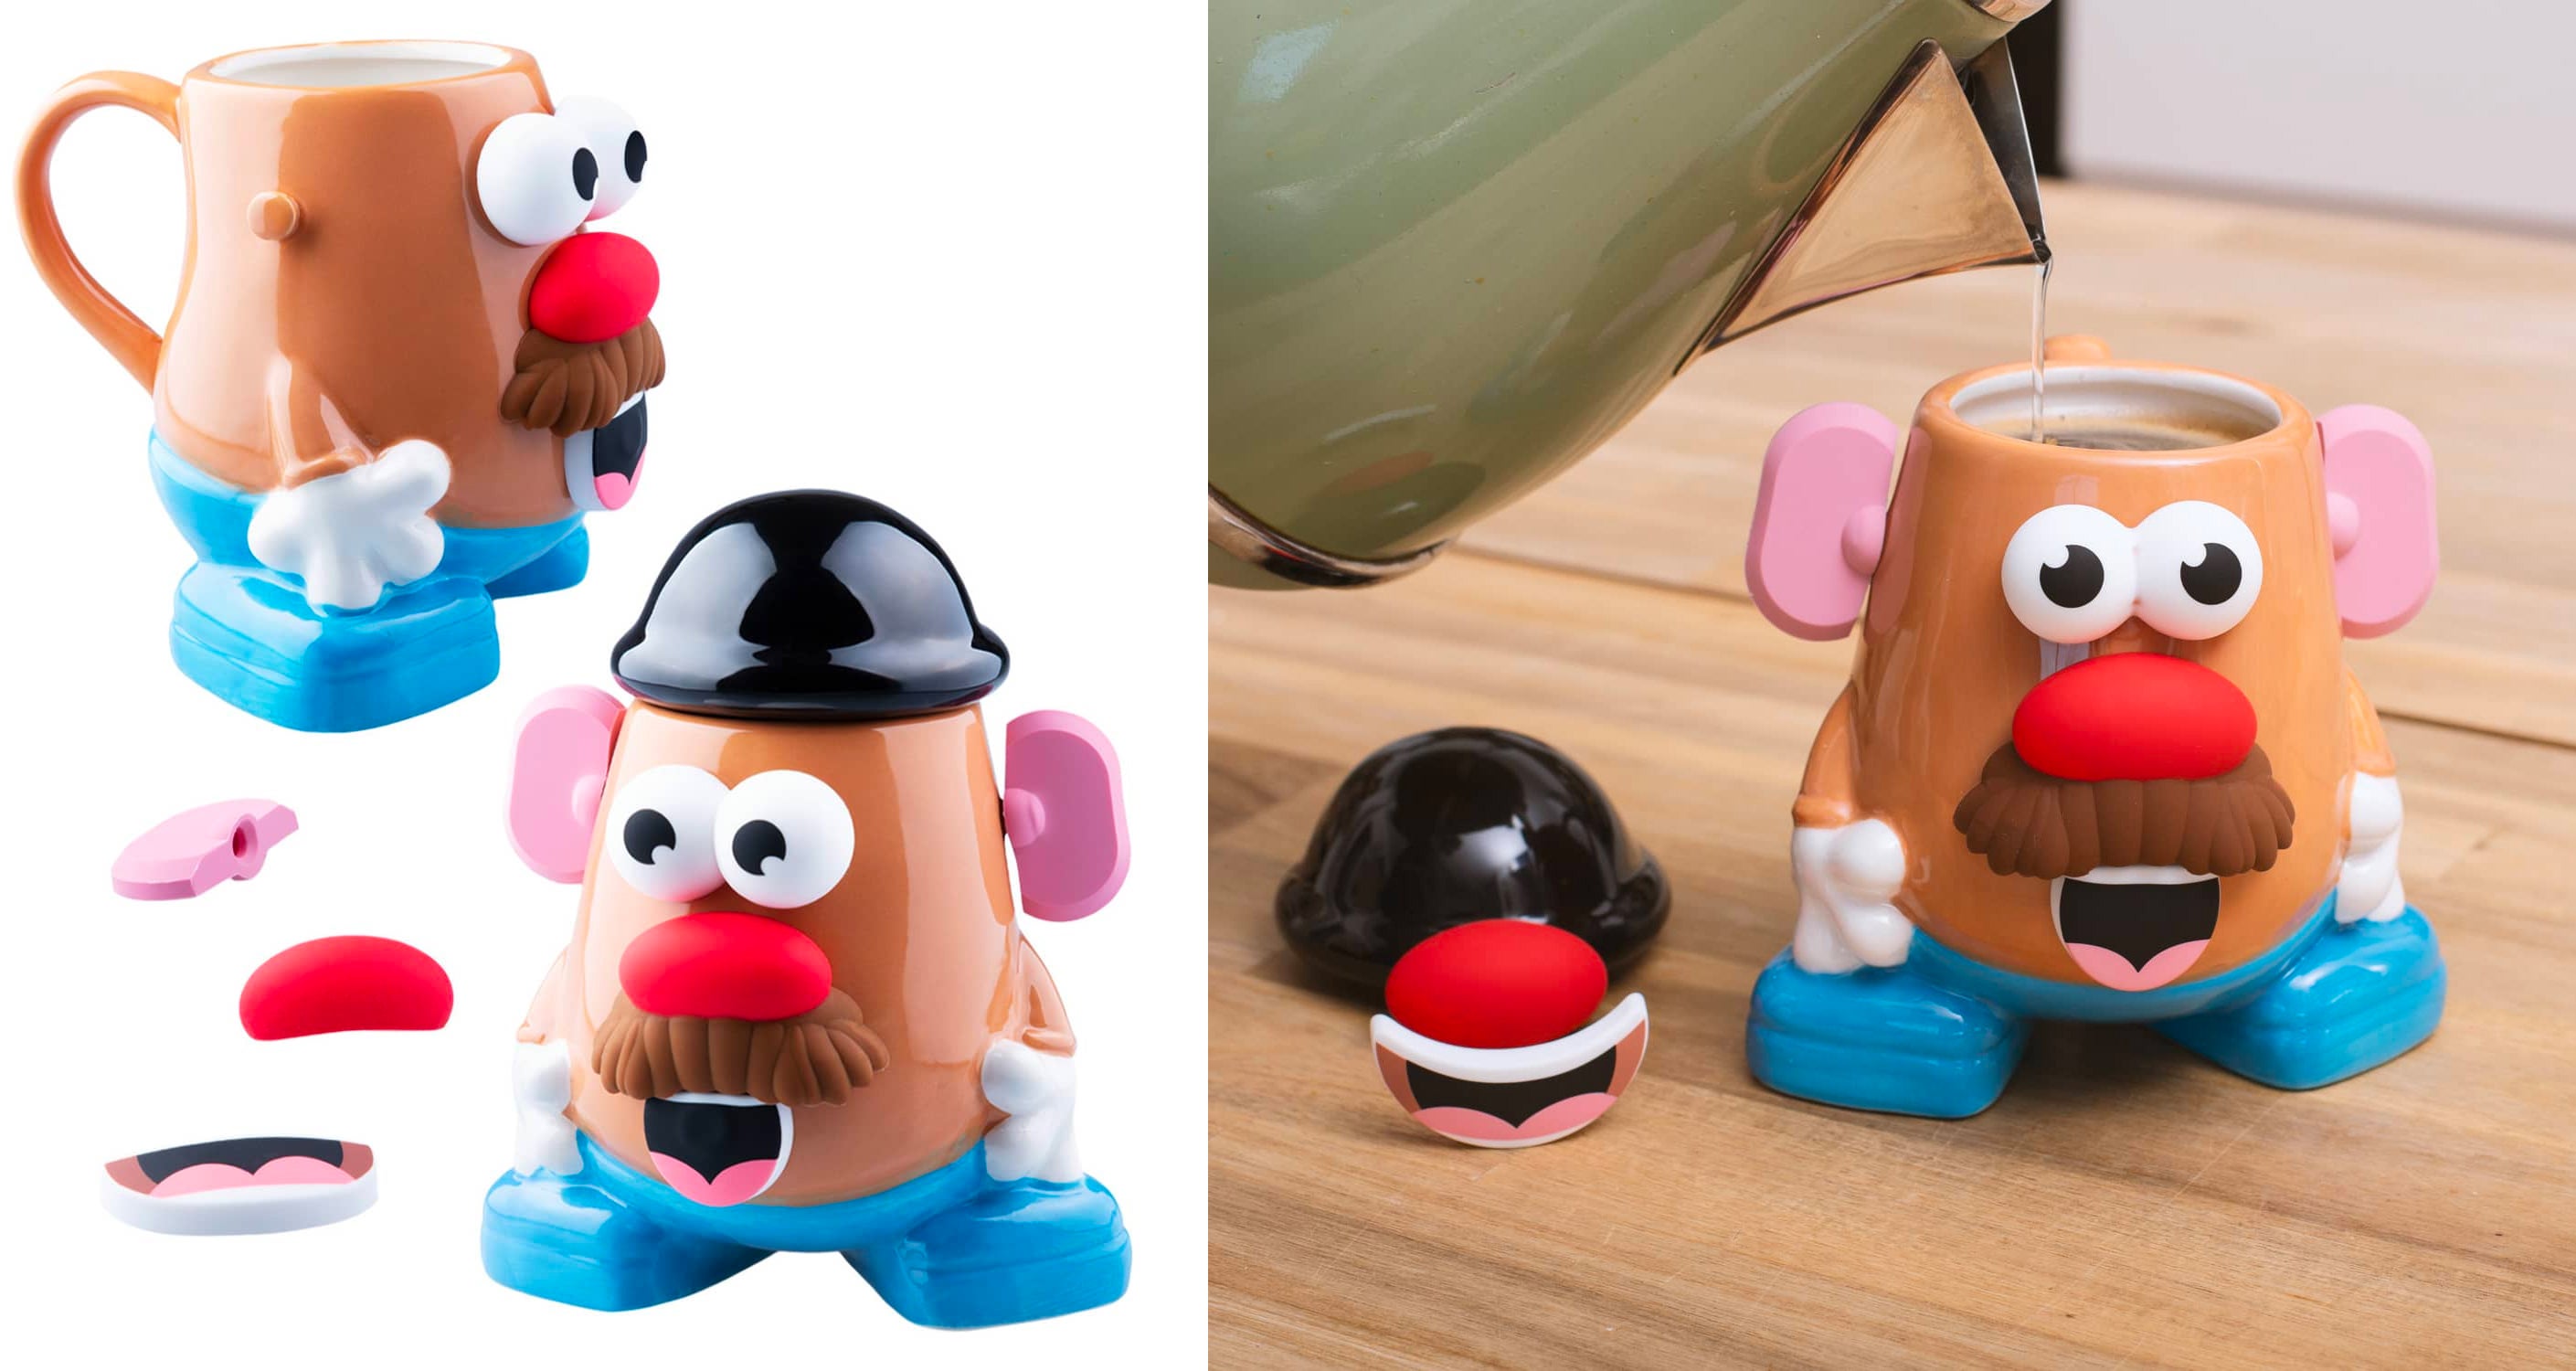 In This Week’s Toy News, We’re All This Mr. Potato Head Mug